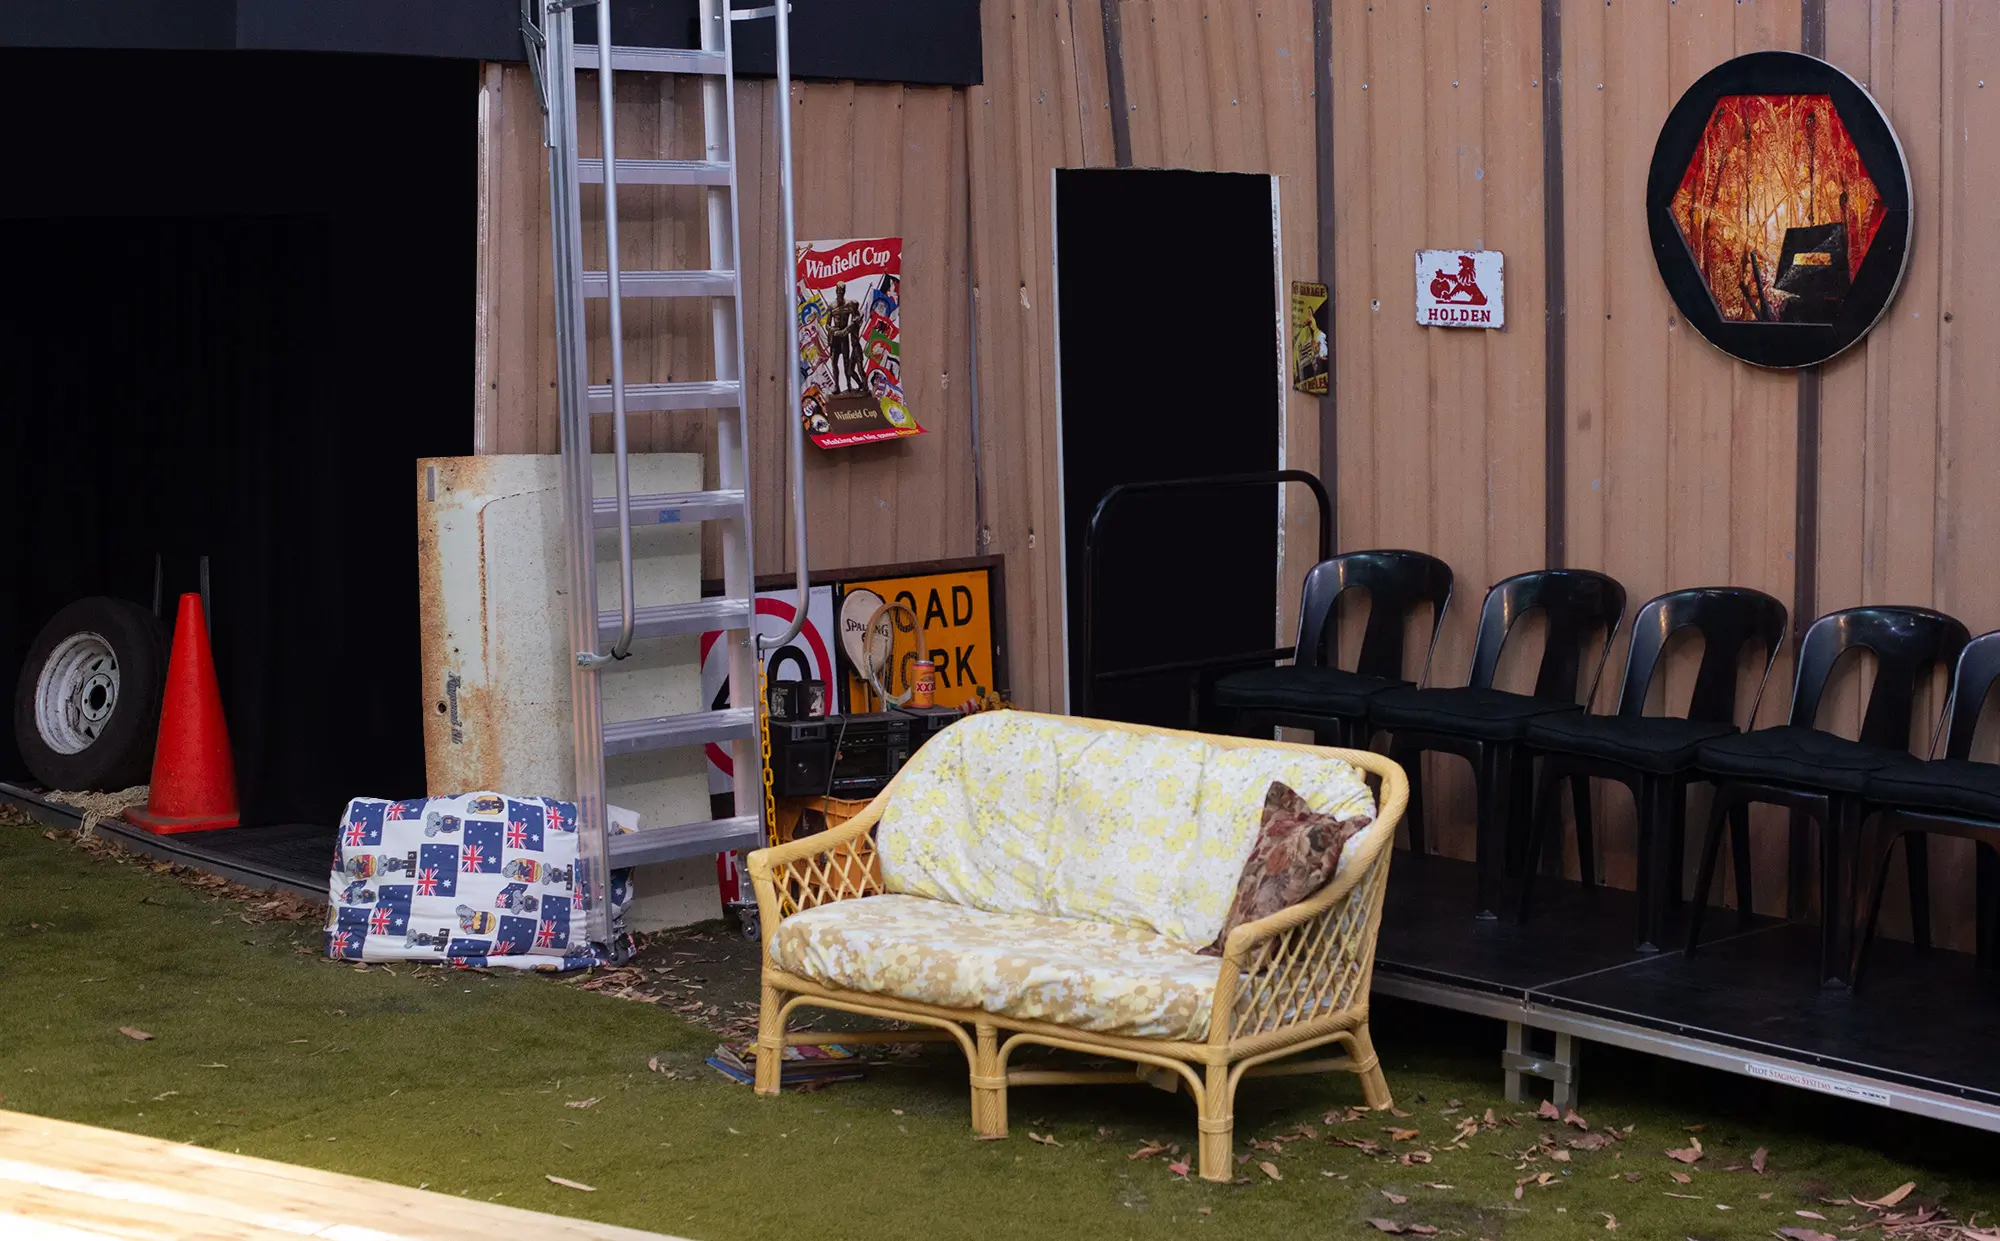 A theatre set: a Queensland car port containing very Queensland things